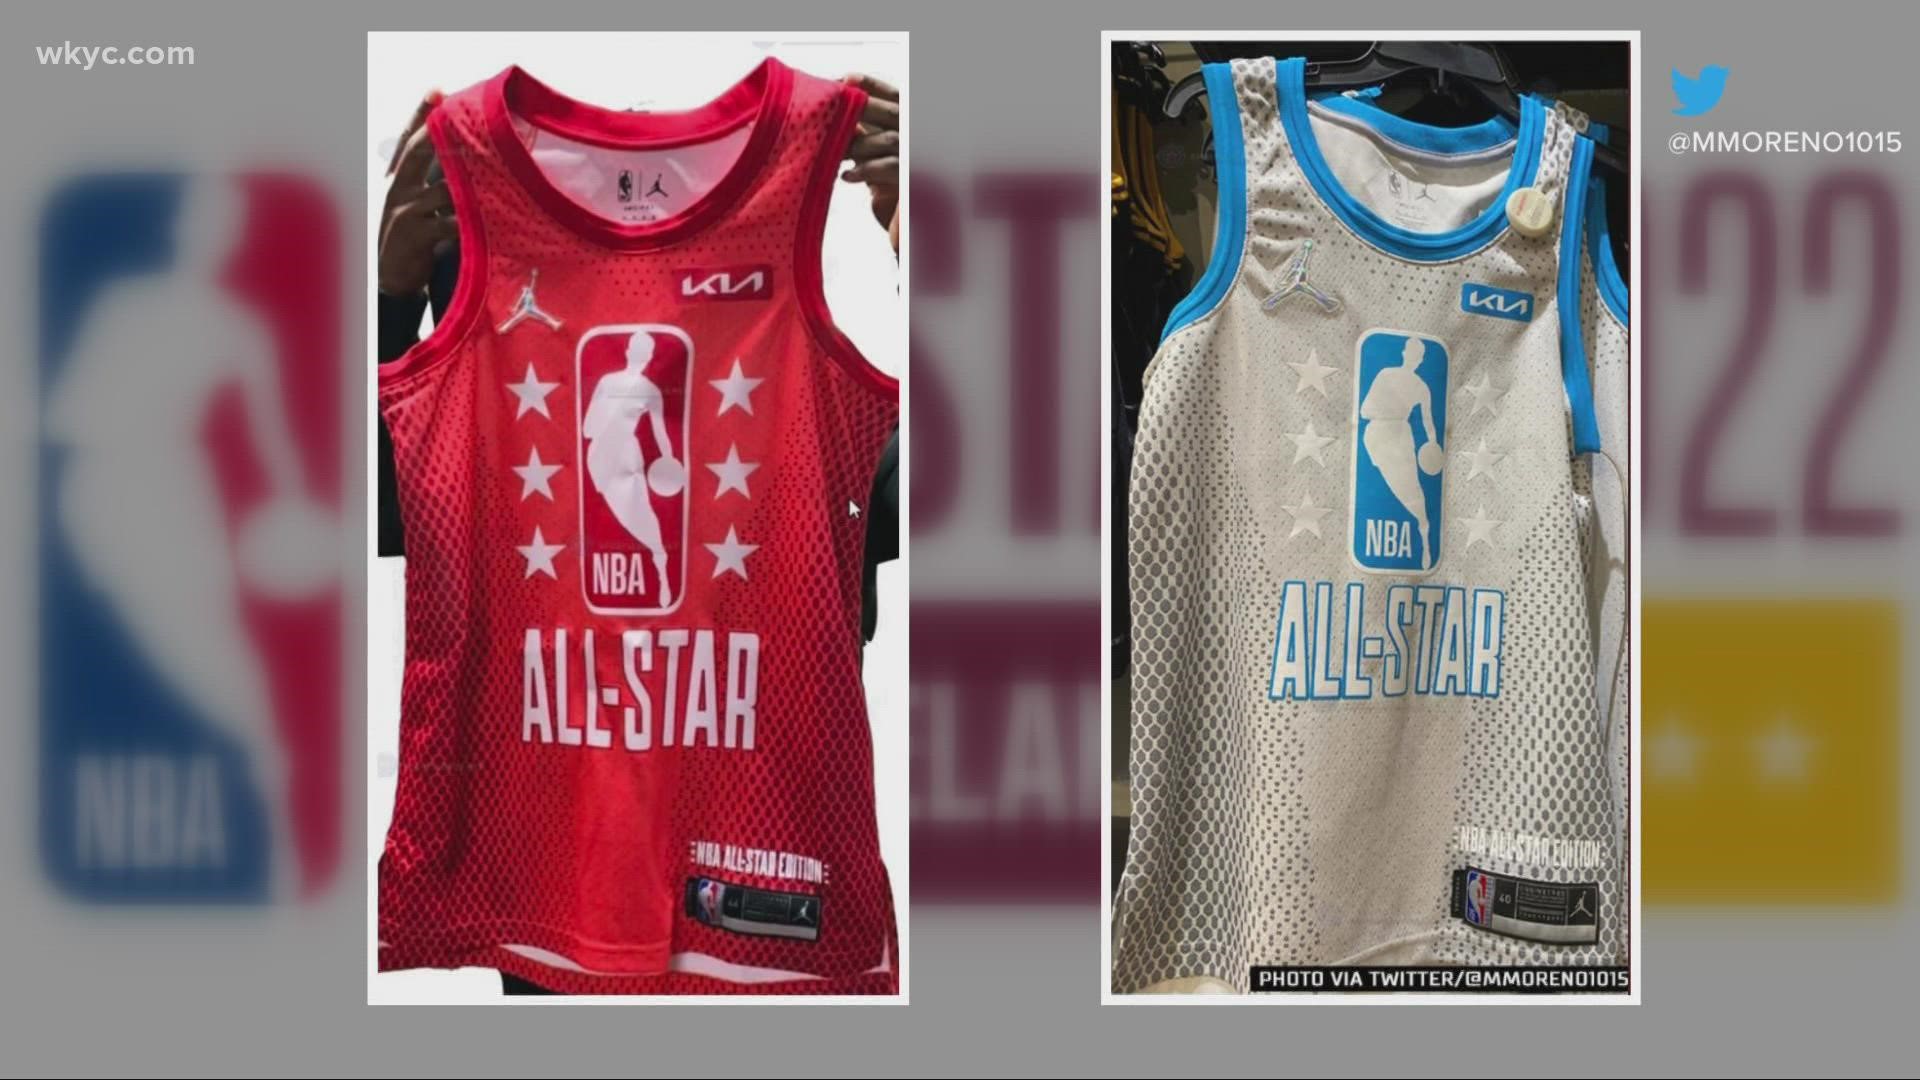 The jerseys for the 2022 NBA All-Star Game in Cleveland have leaked online.